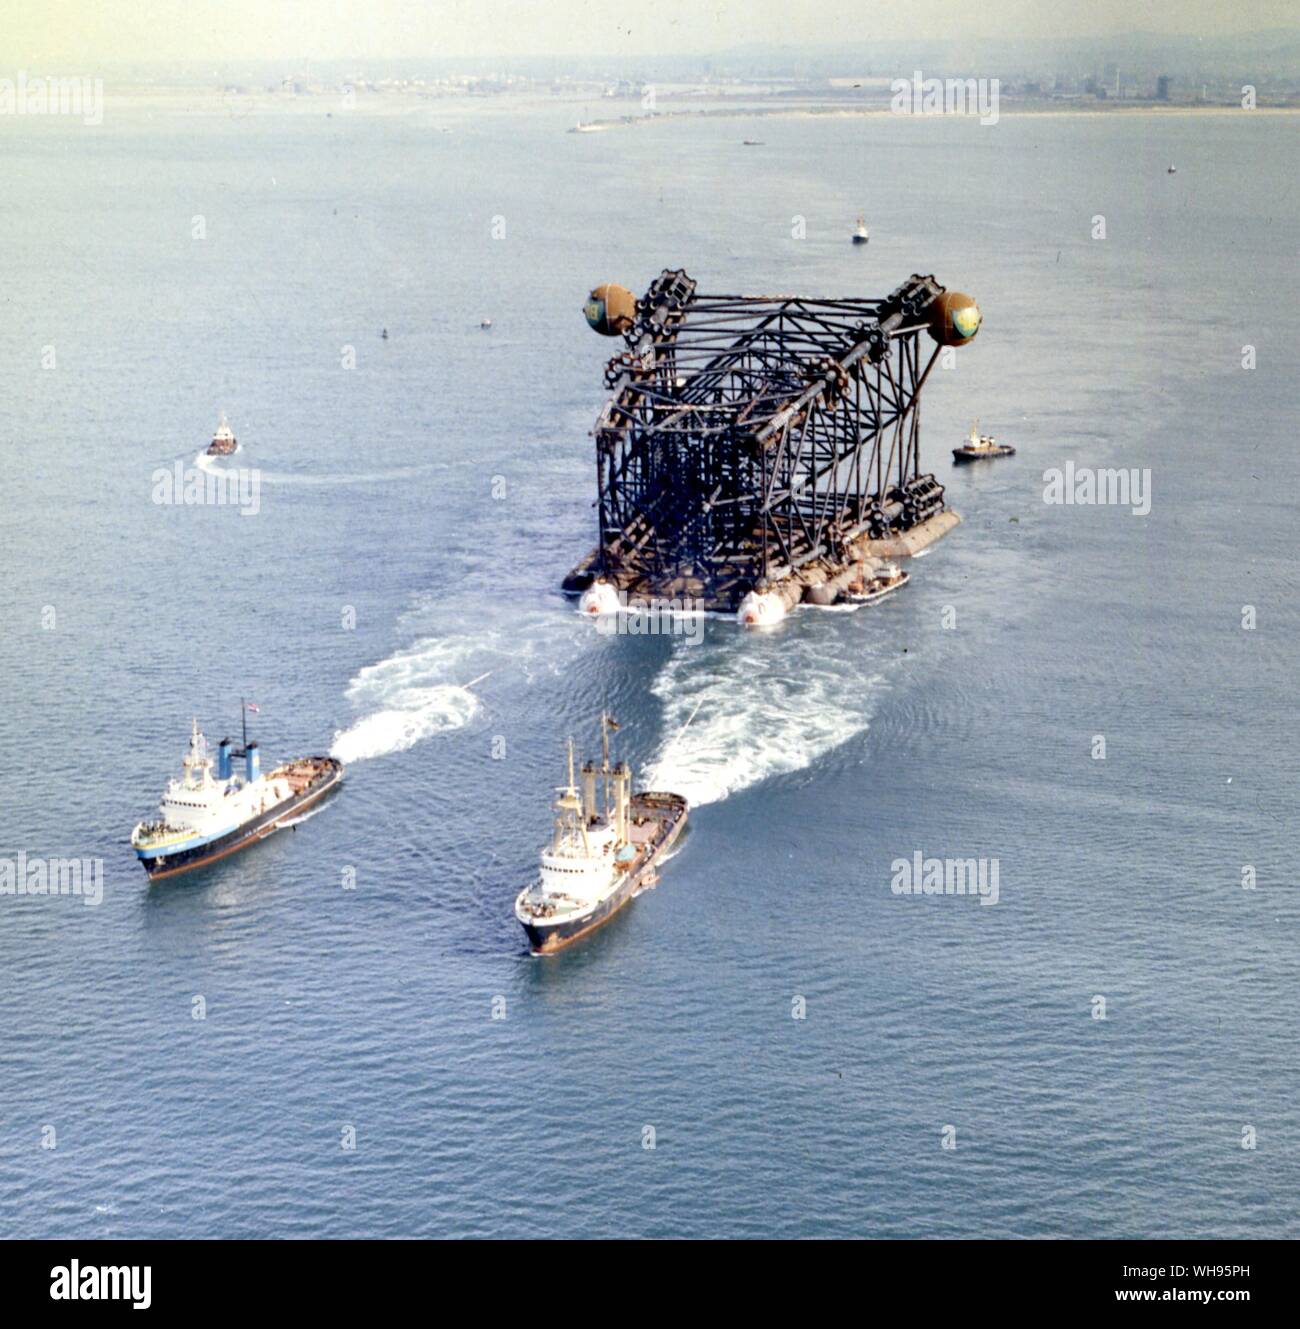 15th June 1975: 'Graythorp II' jacket section of production platform for BP's Forties oilfield in the North Sea, at the start of its tow from the construction dock at Graythorp, near Hartlepool to site.. Stock Photo